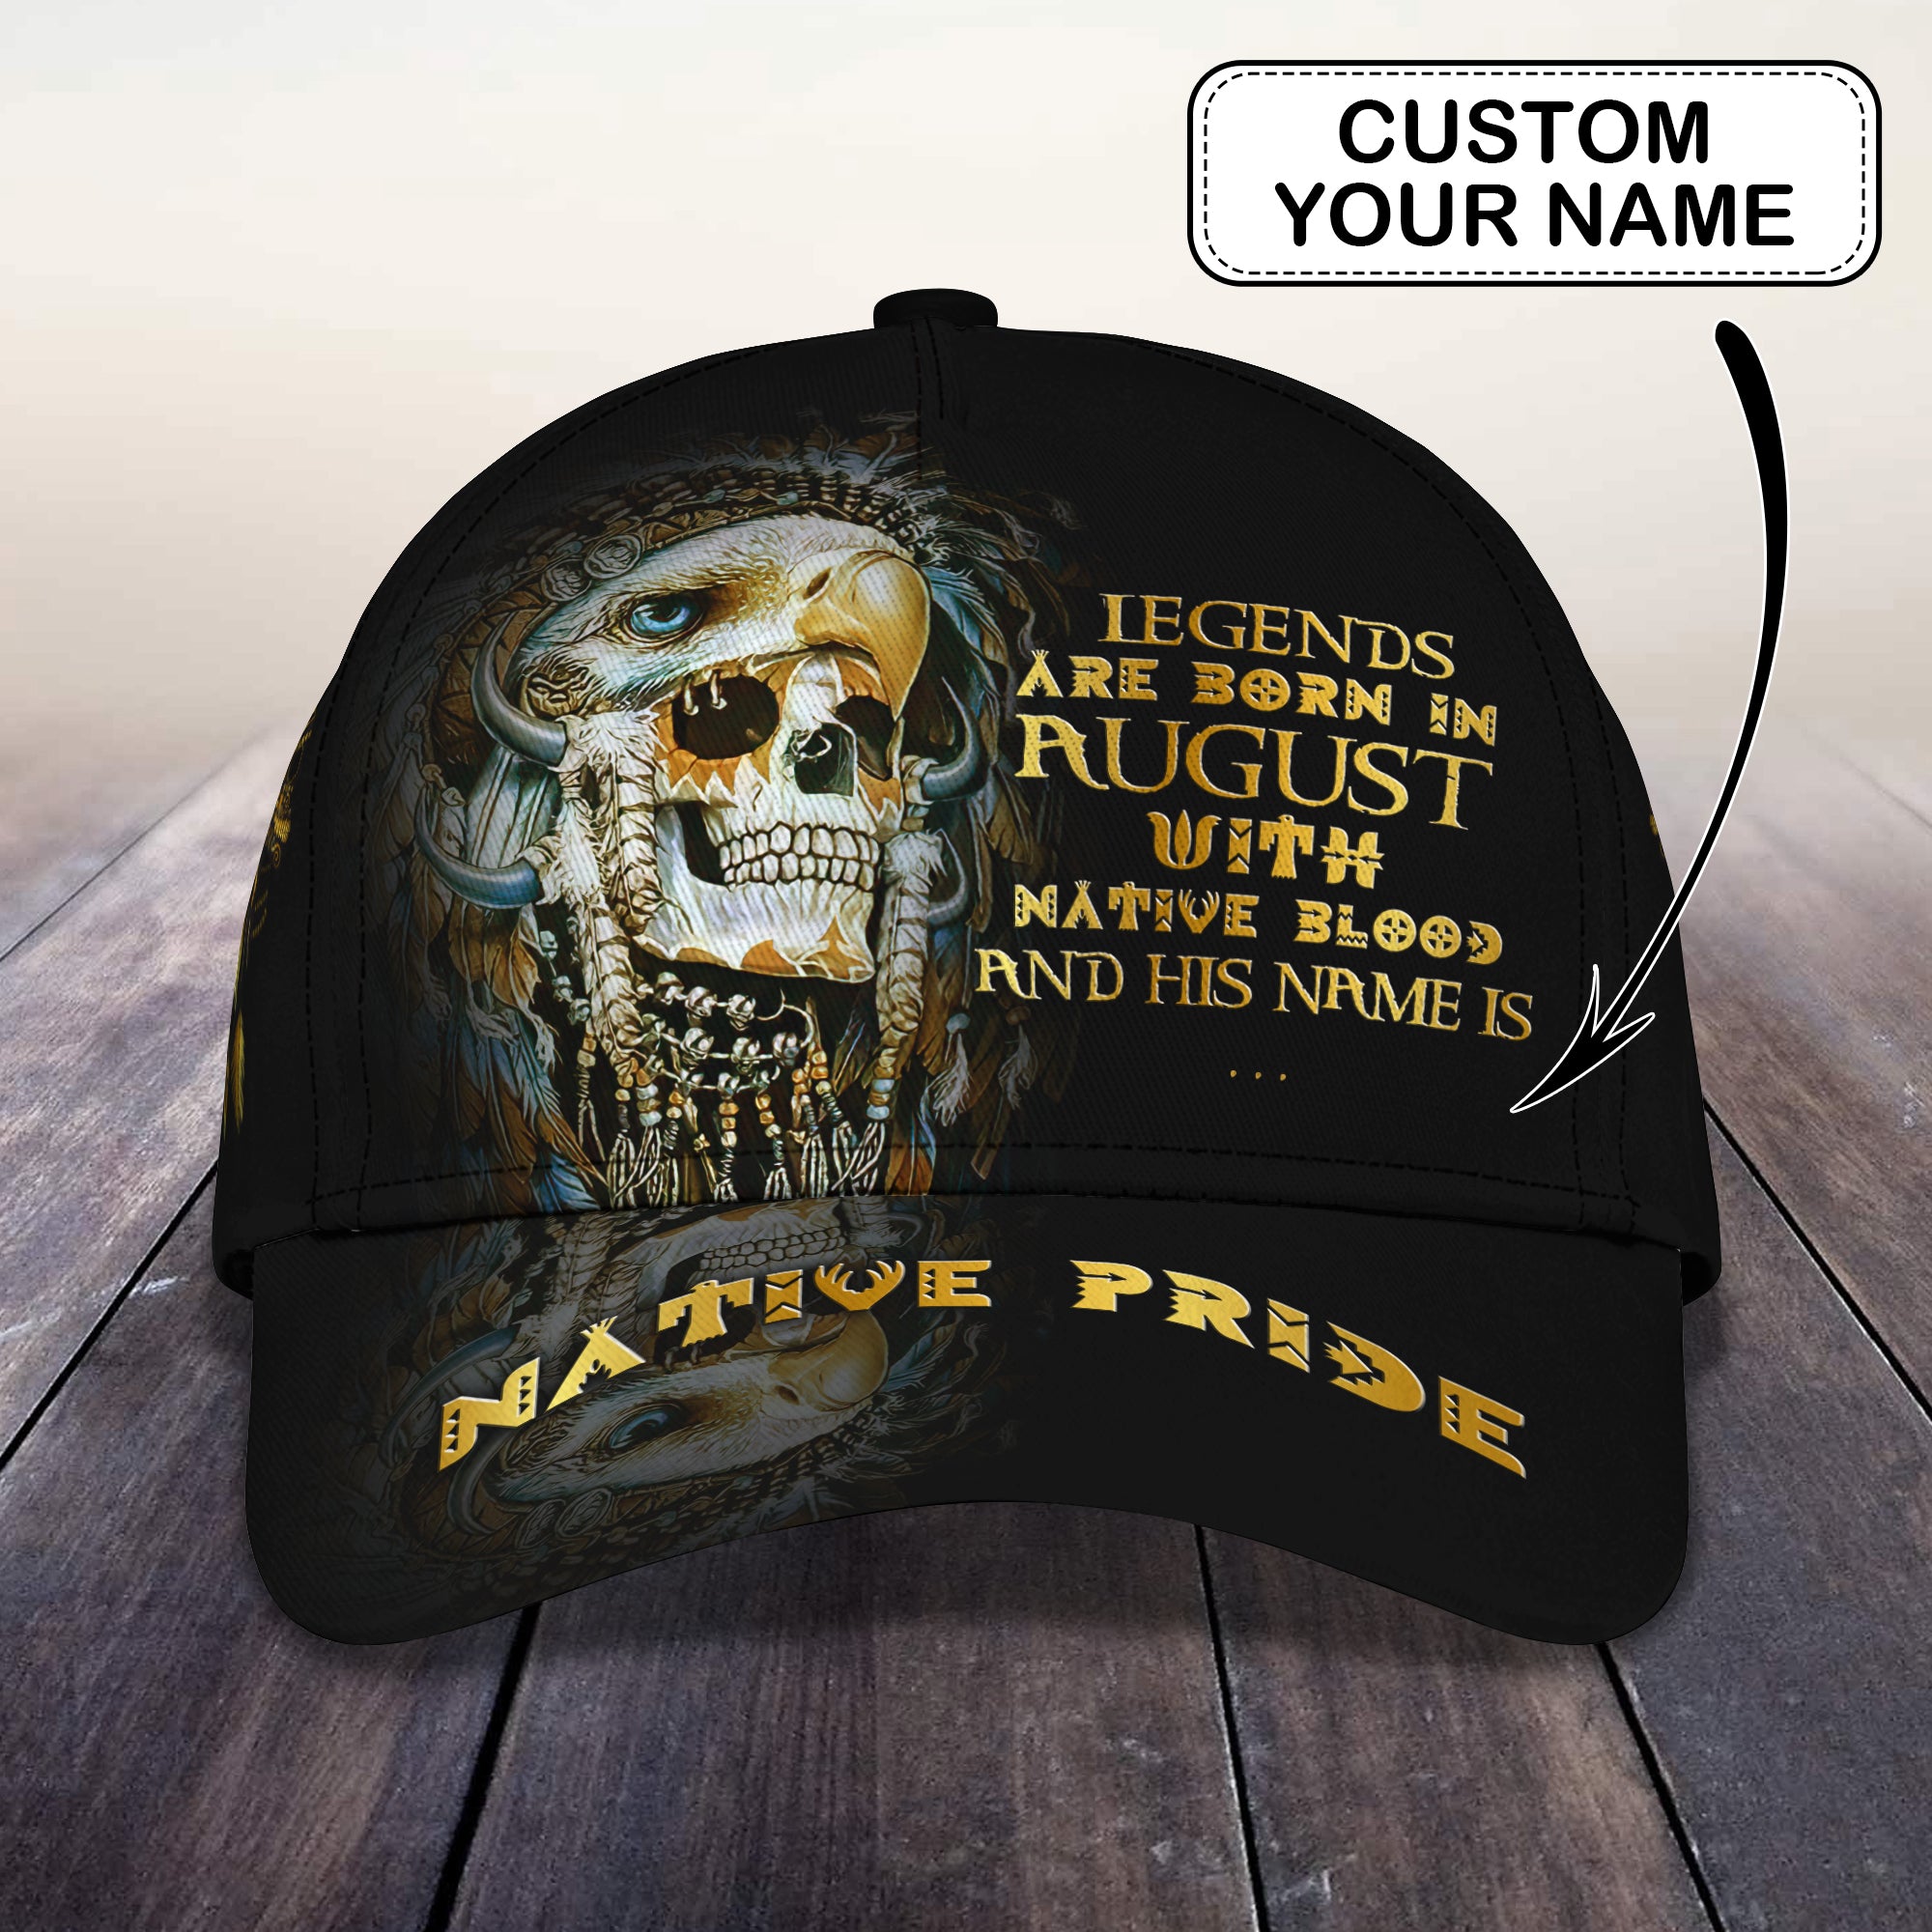 August Legend with Native blood - Personalized Name Cap - Loop - Vhv-cap-030